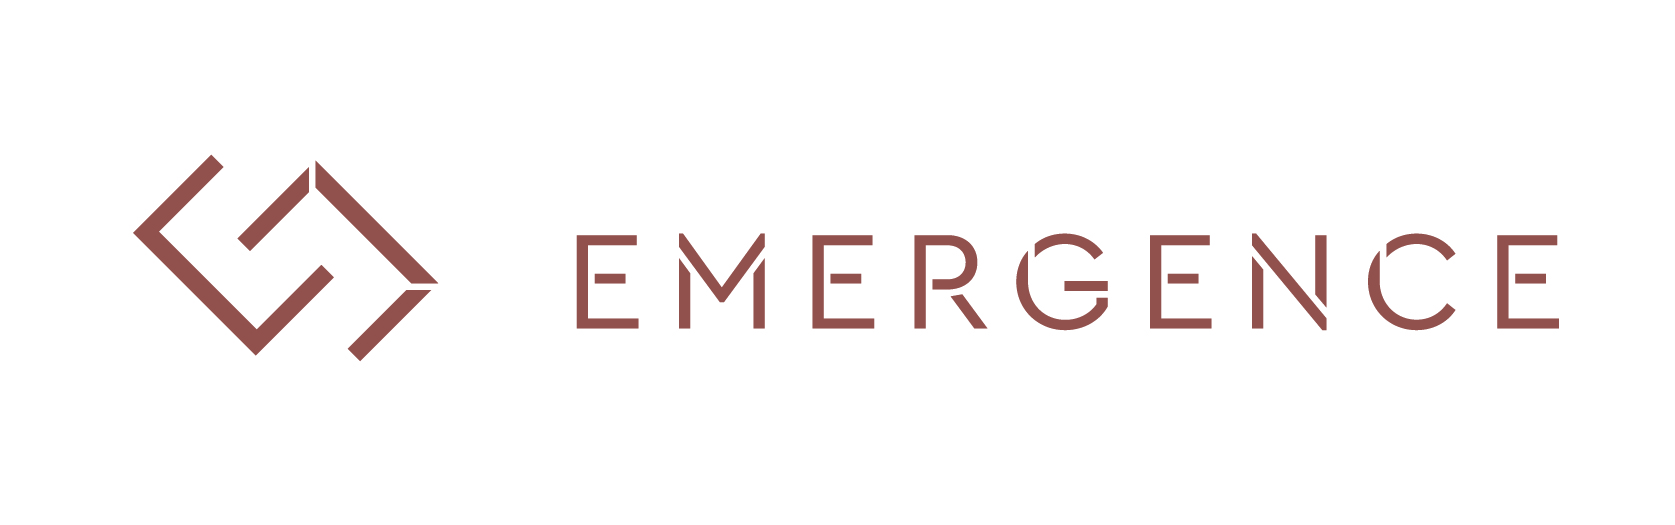 questions ? email at : info@emergence.lu 